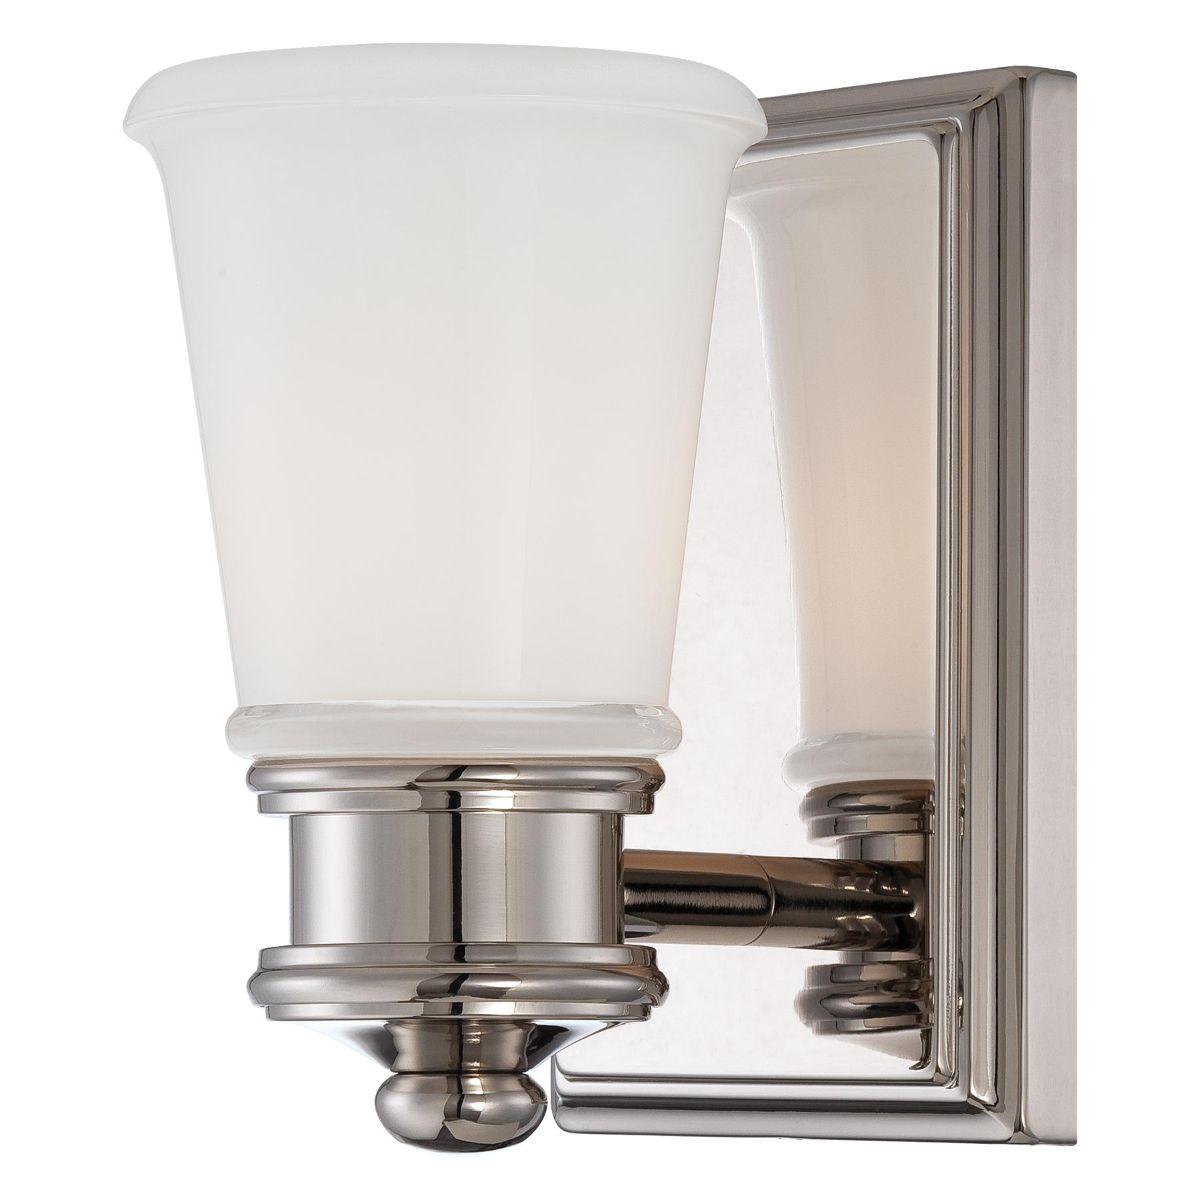 6 in. Wall Sconce Polished Nickel finish